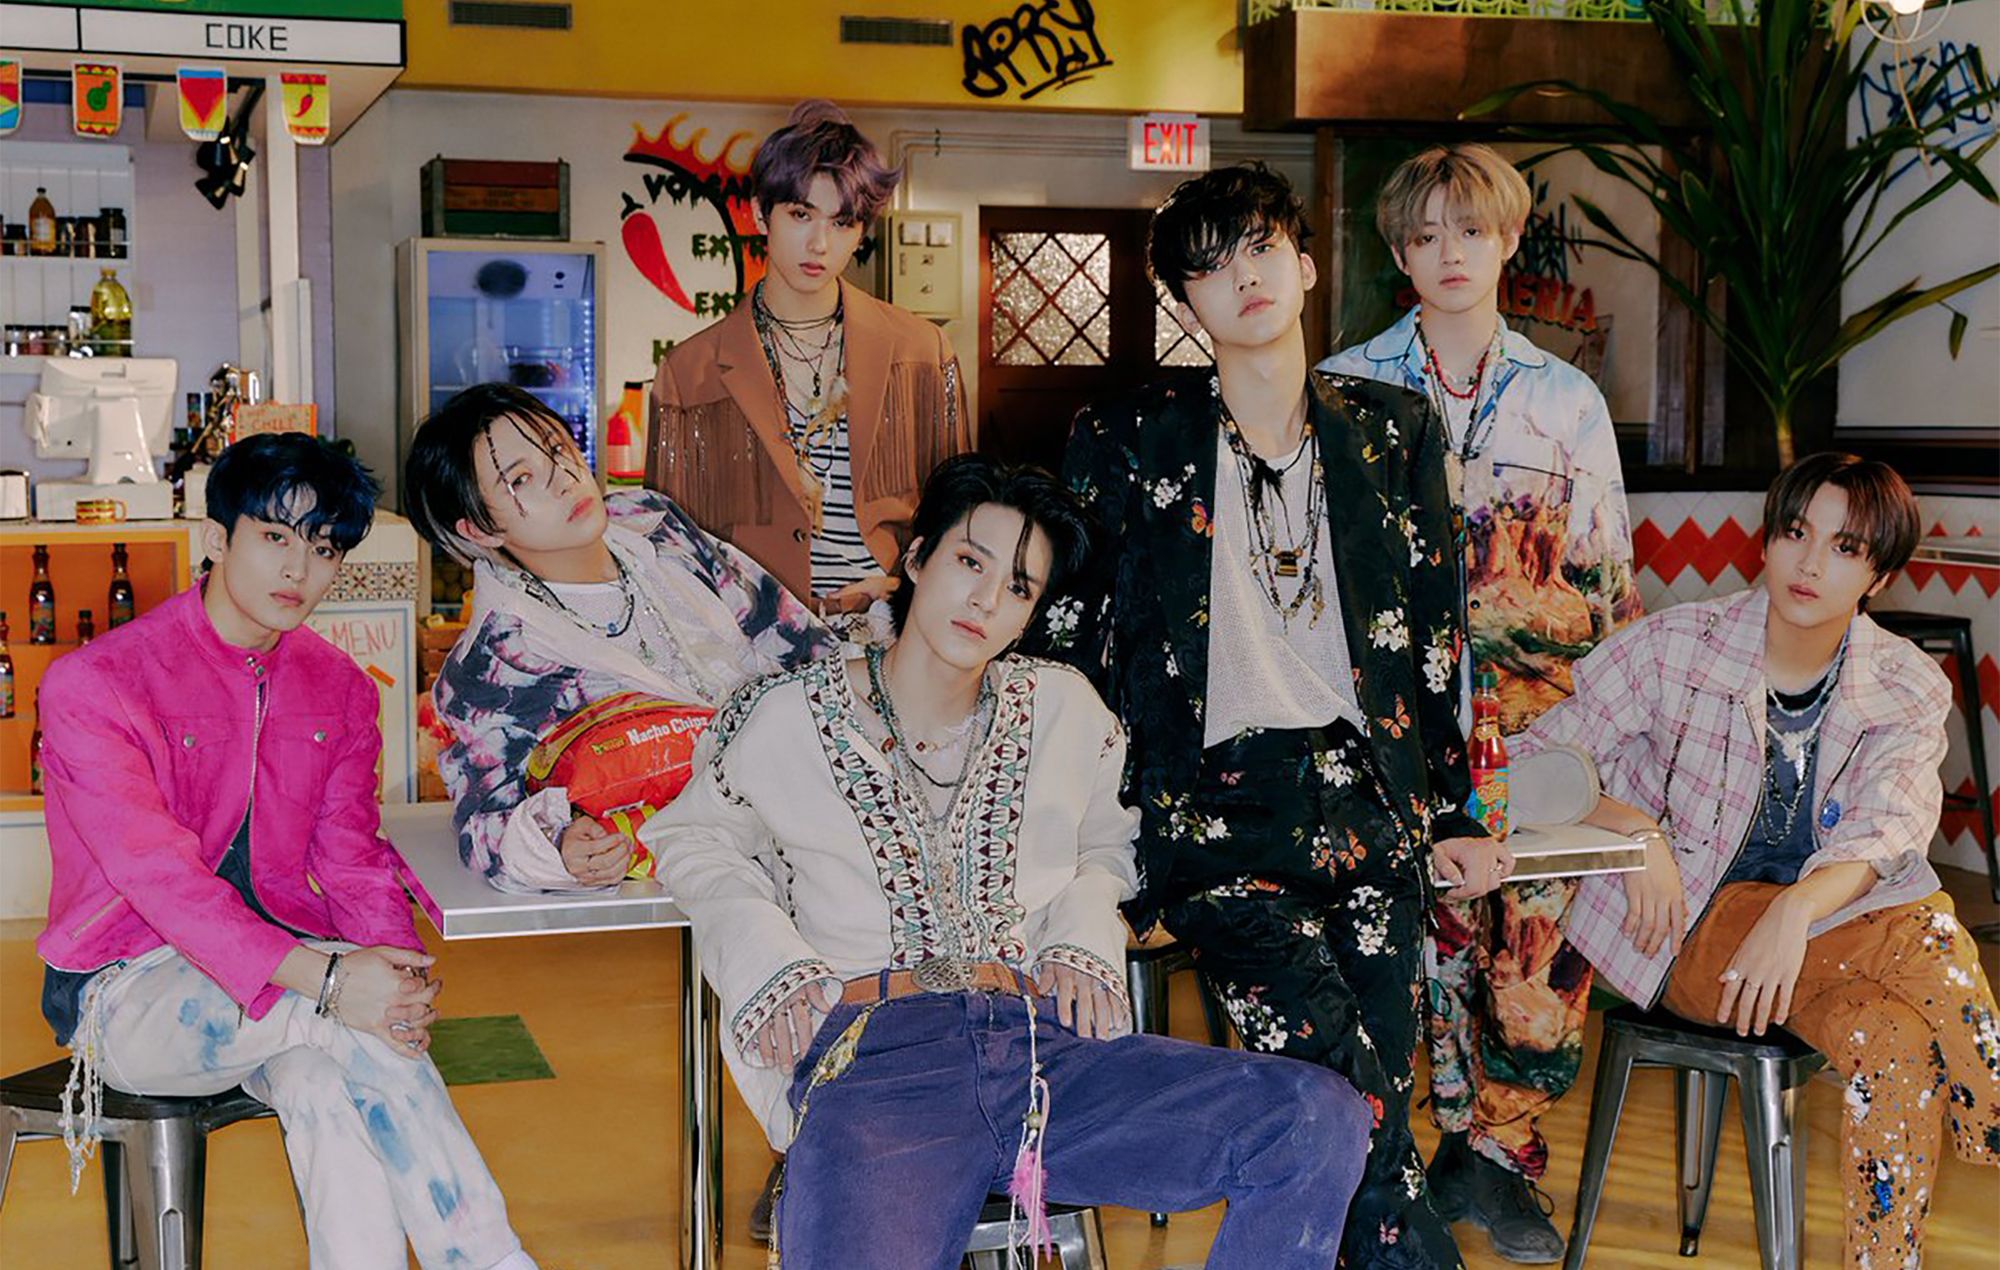 Watch NCT Dream take over a taqueria in whimisical 'Hot Sauce' music video